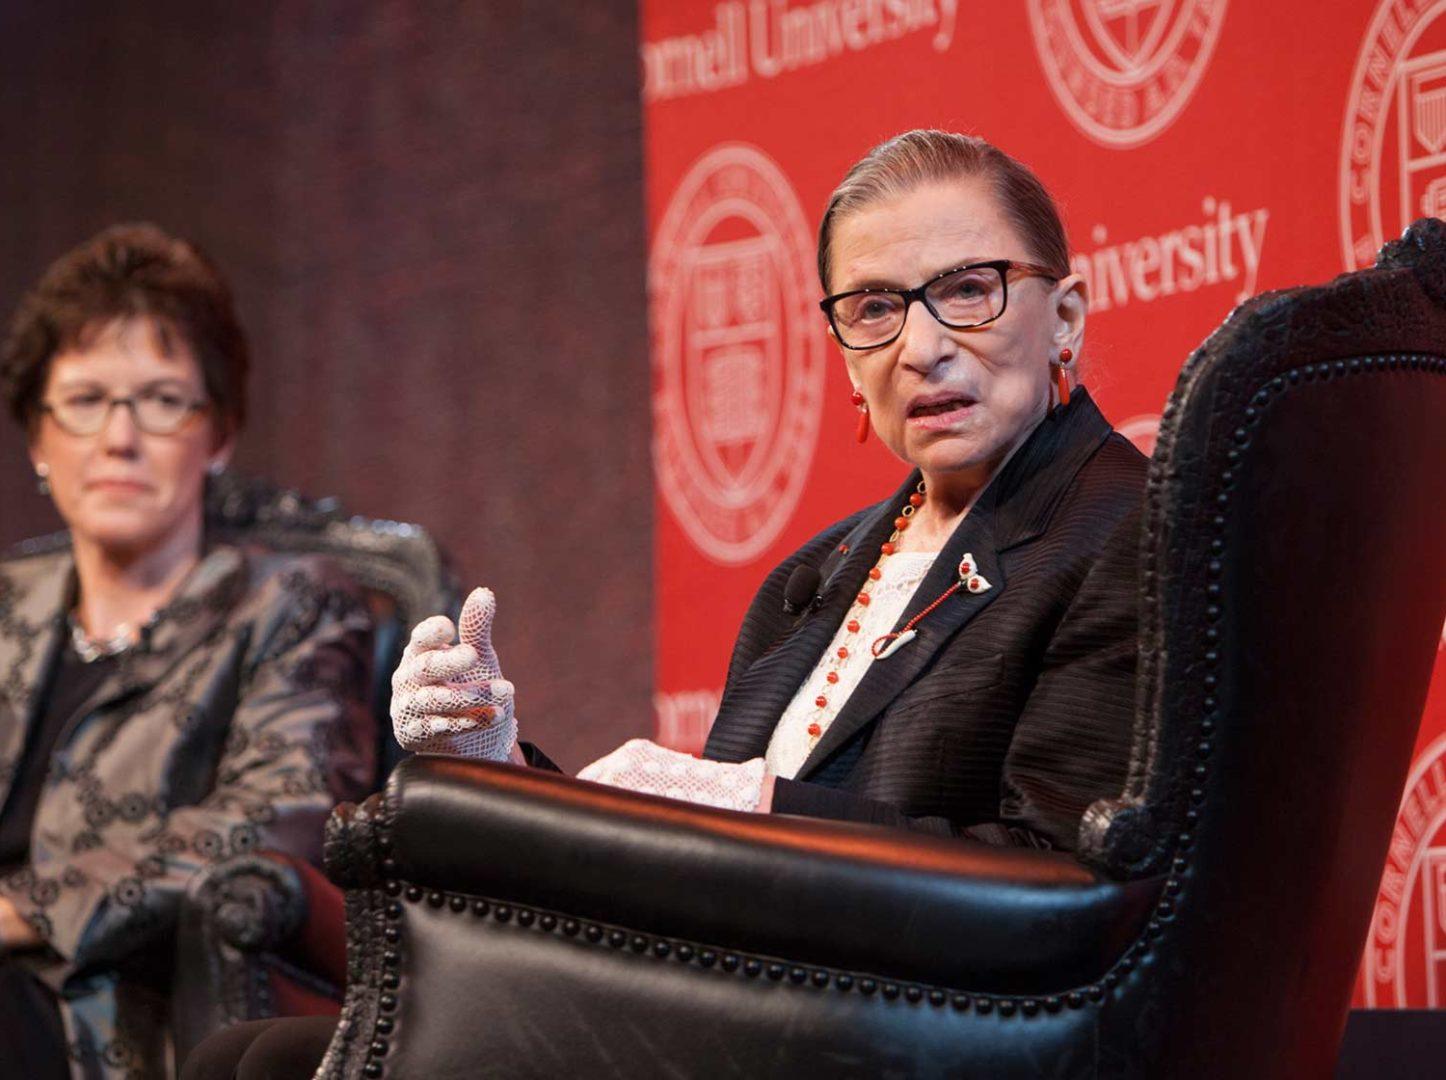 "From Brooklyn to the Bench: A Conversation," part of the 2014 Ezra Cornell Circle Reception, with Arts and Sciences (CAS) Dean Gretchen Ritter and the Honorable Ruth Bader Ginsburg '54, Associate Justice of the Supreme Court.